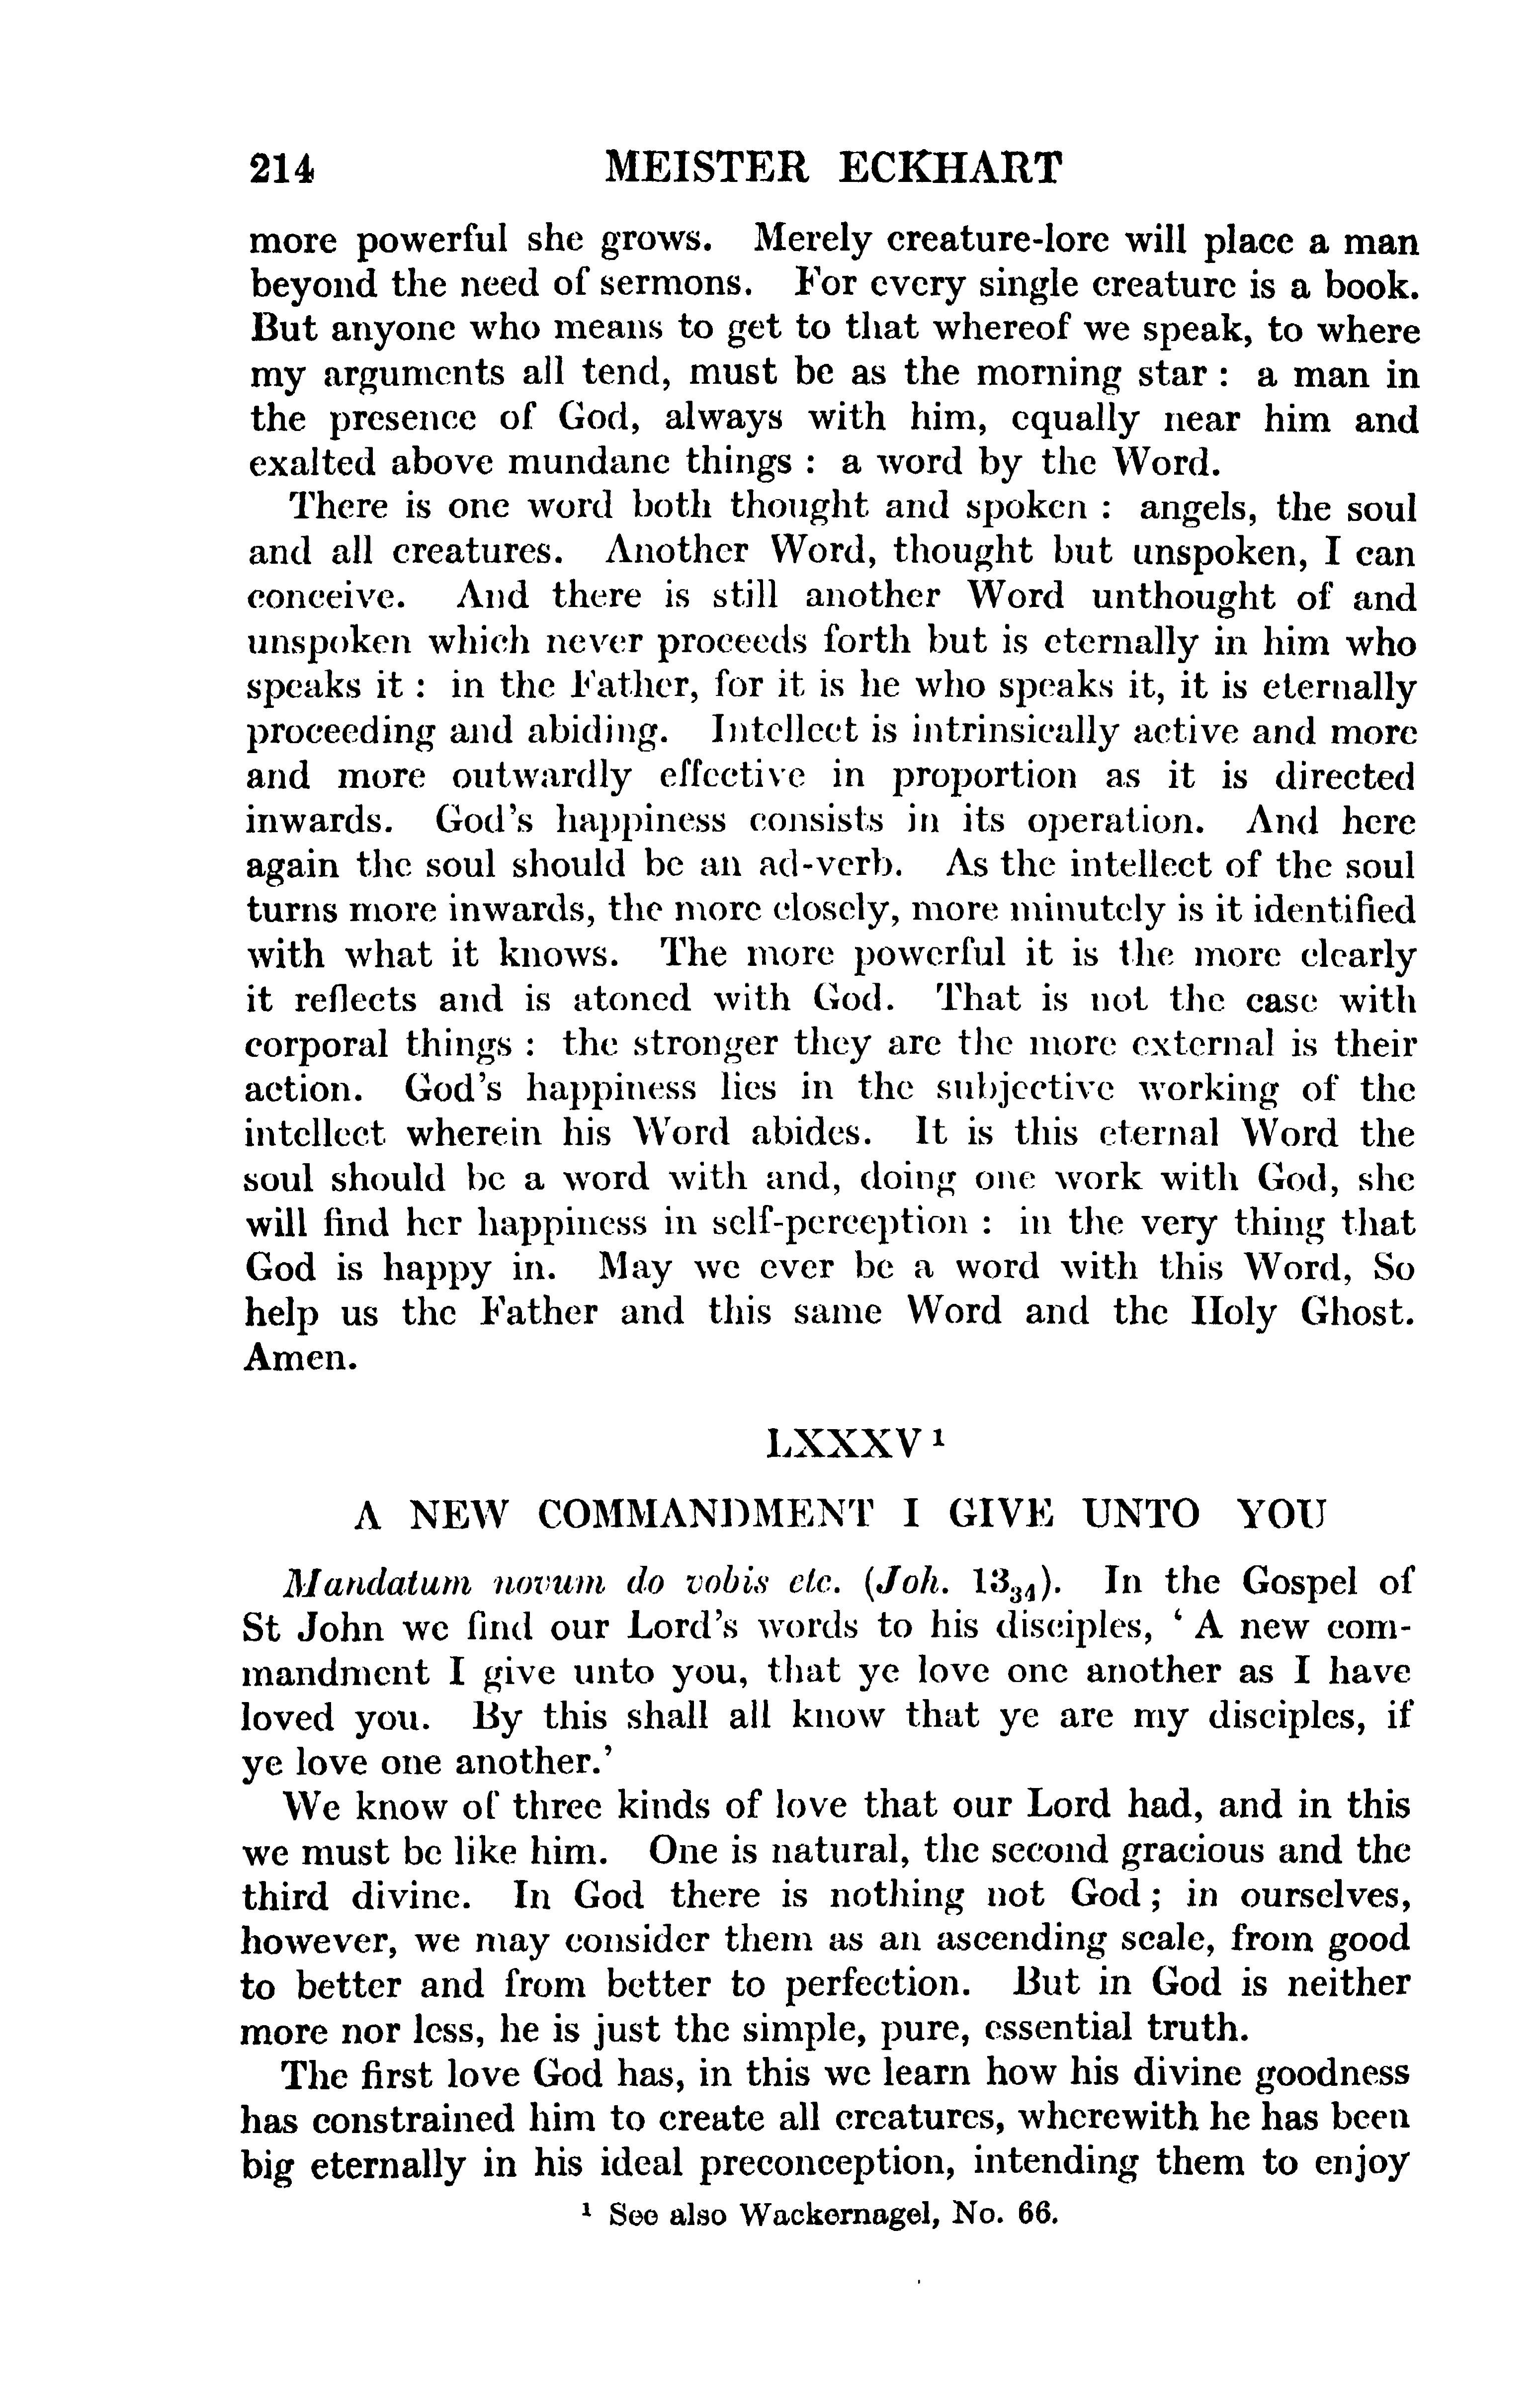 Image of page 0238